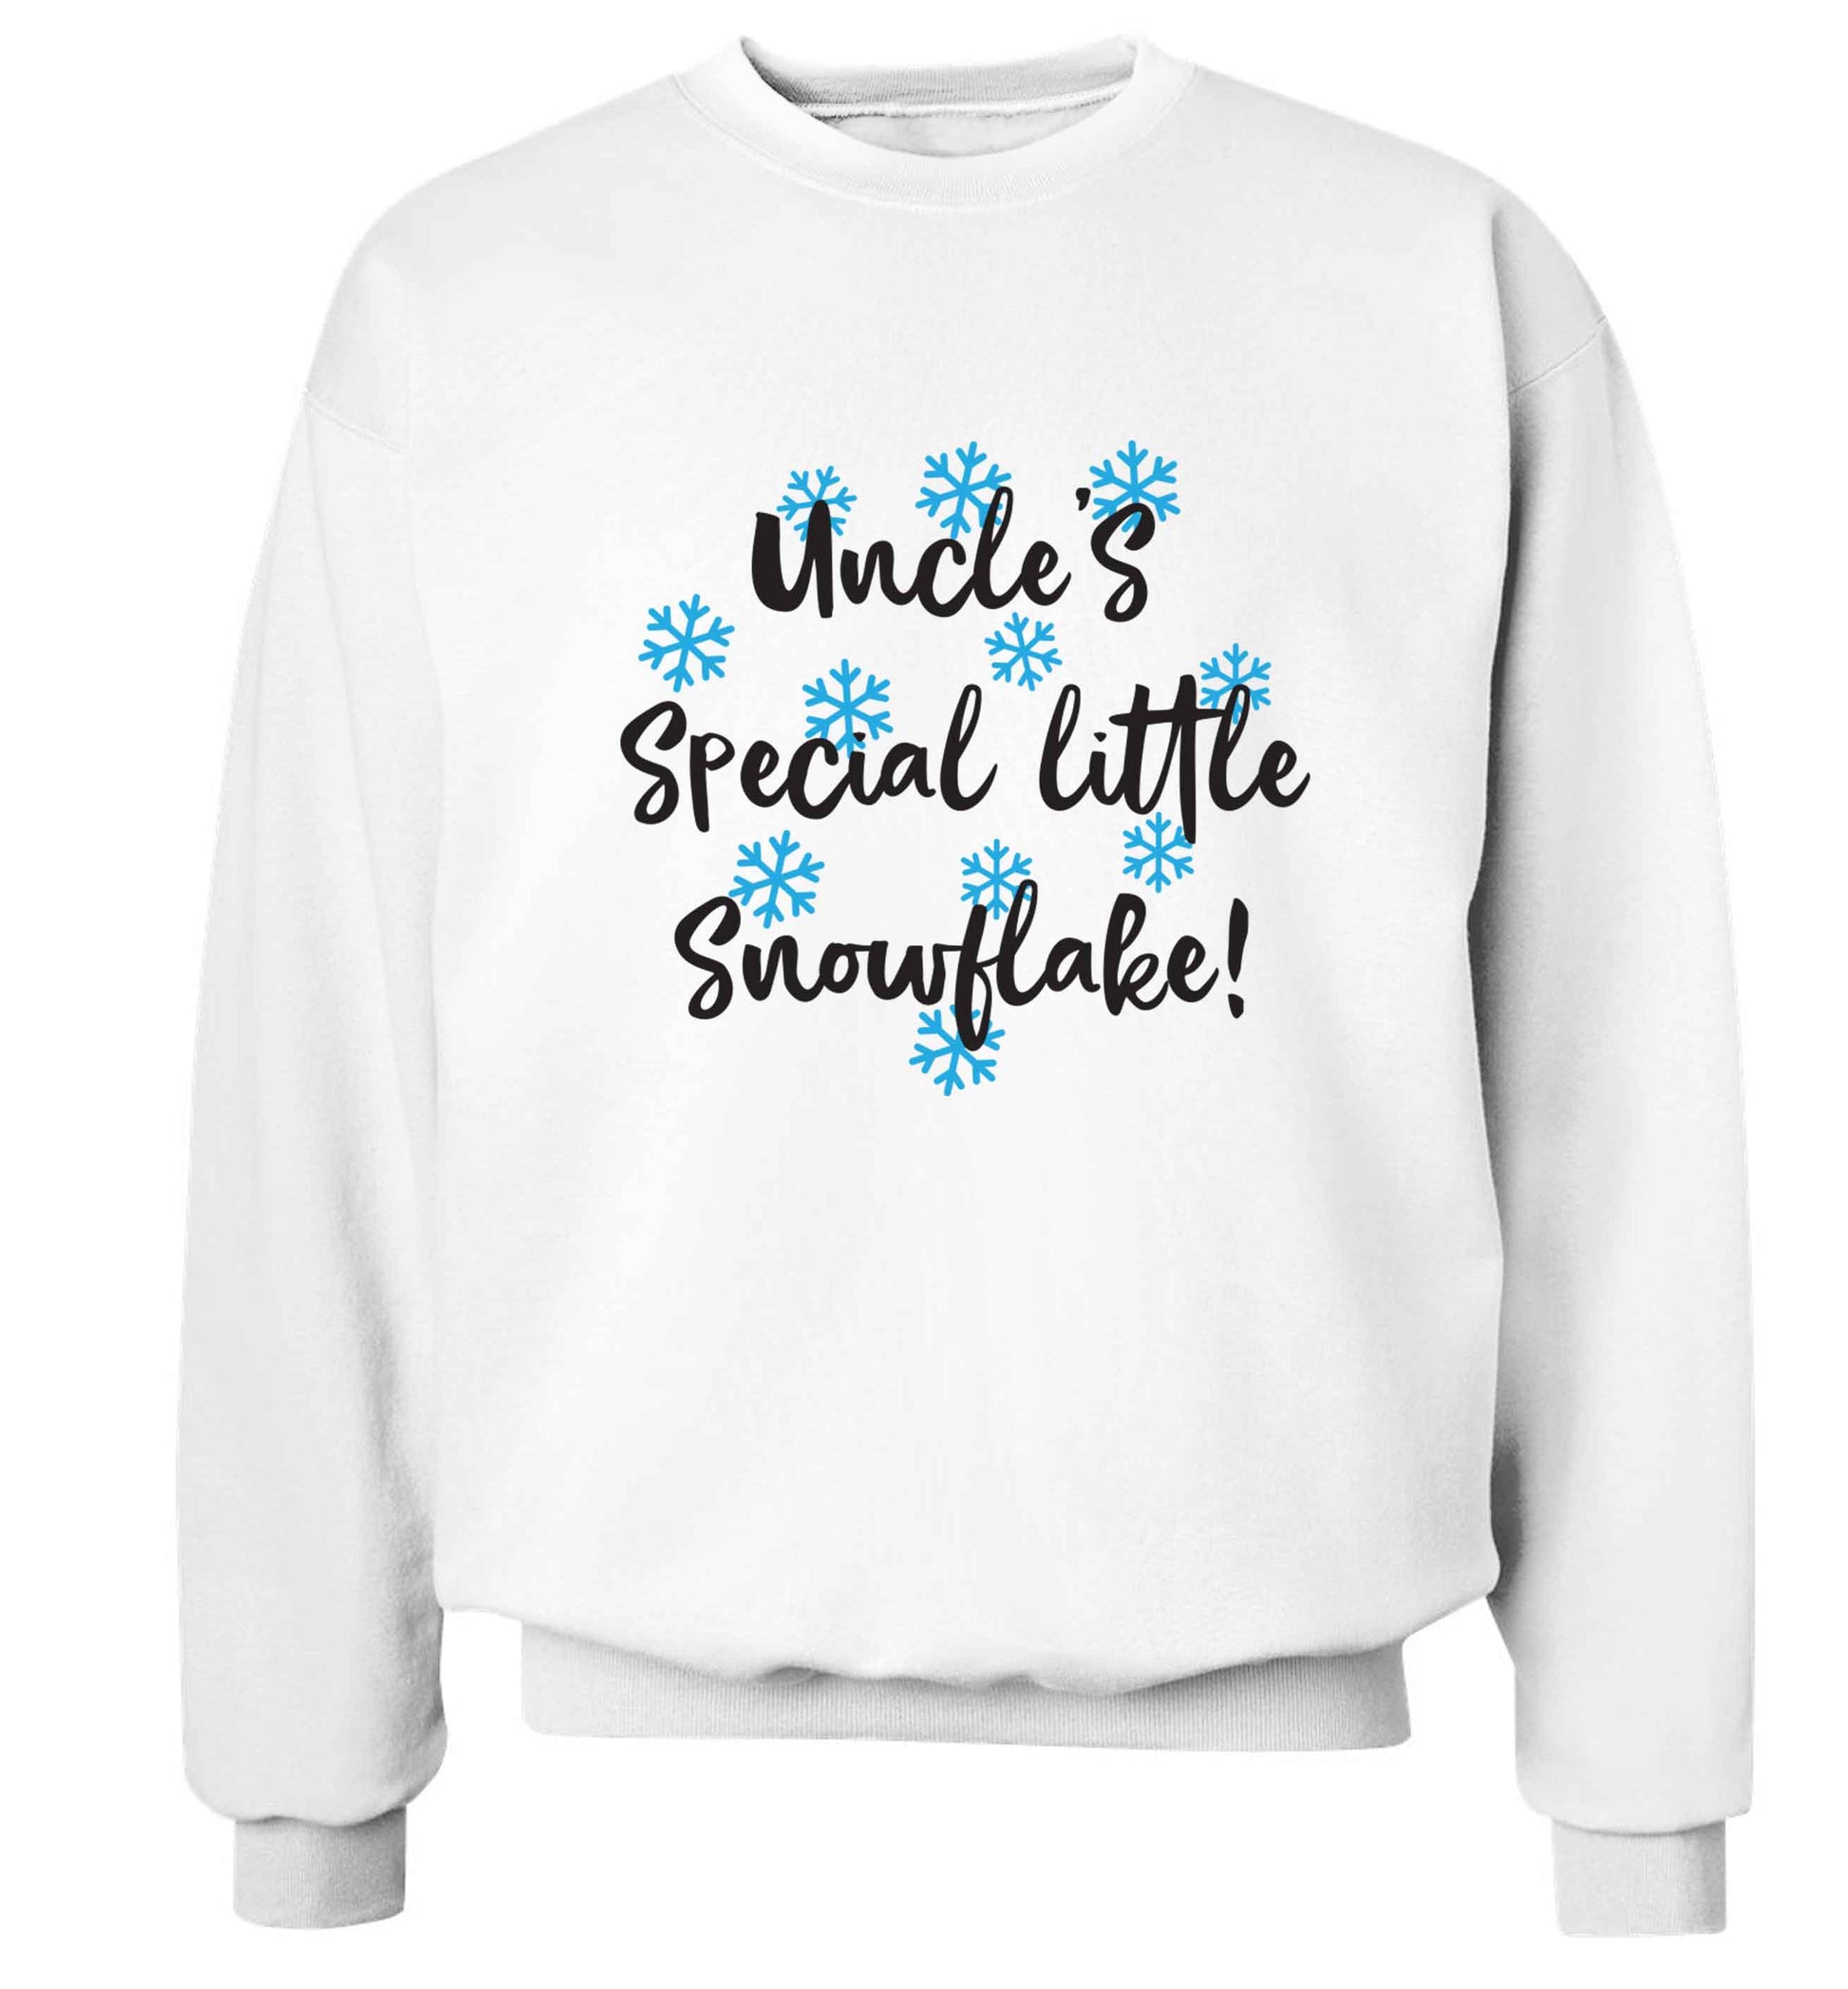 Uncle's special little snowflake Adult's unisex white Sweater 2XL